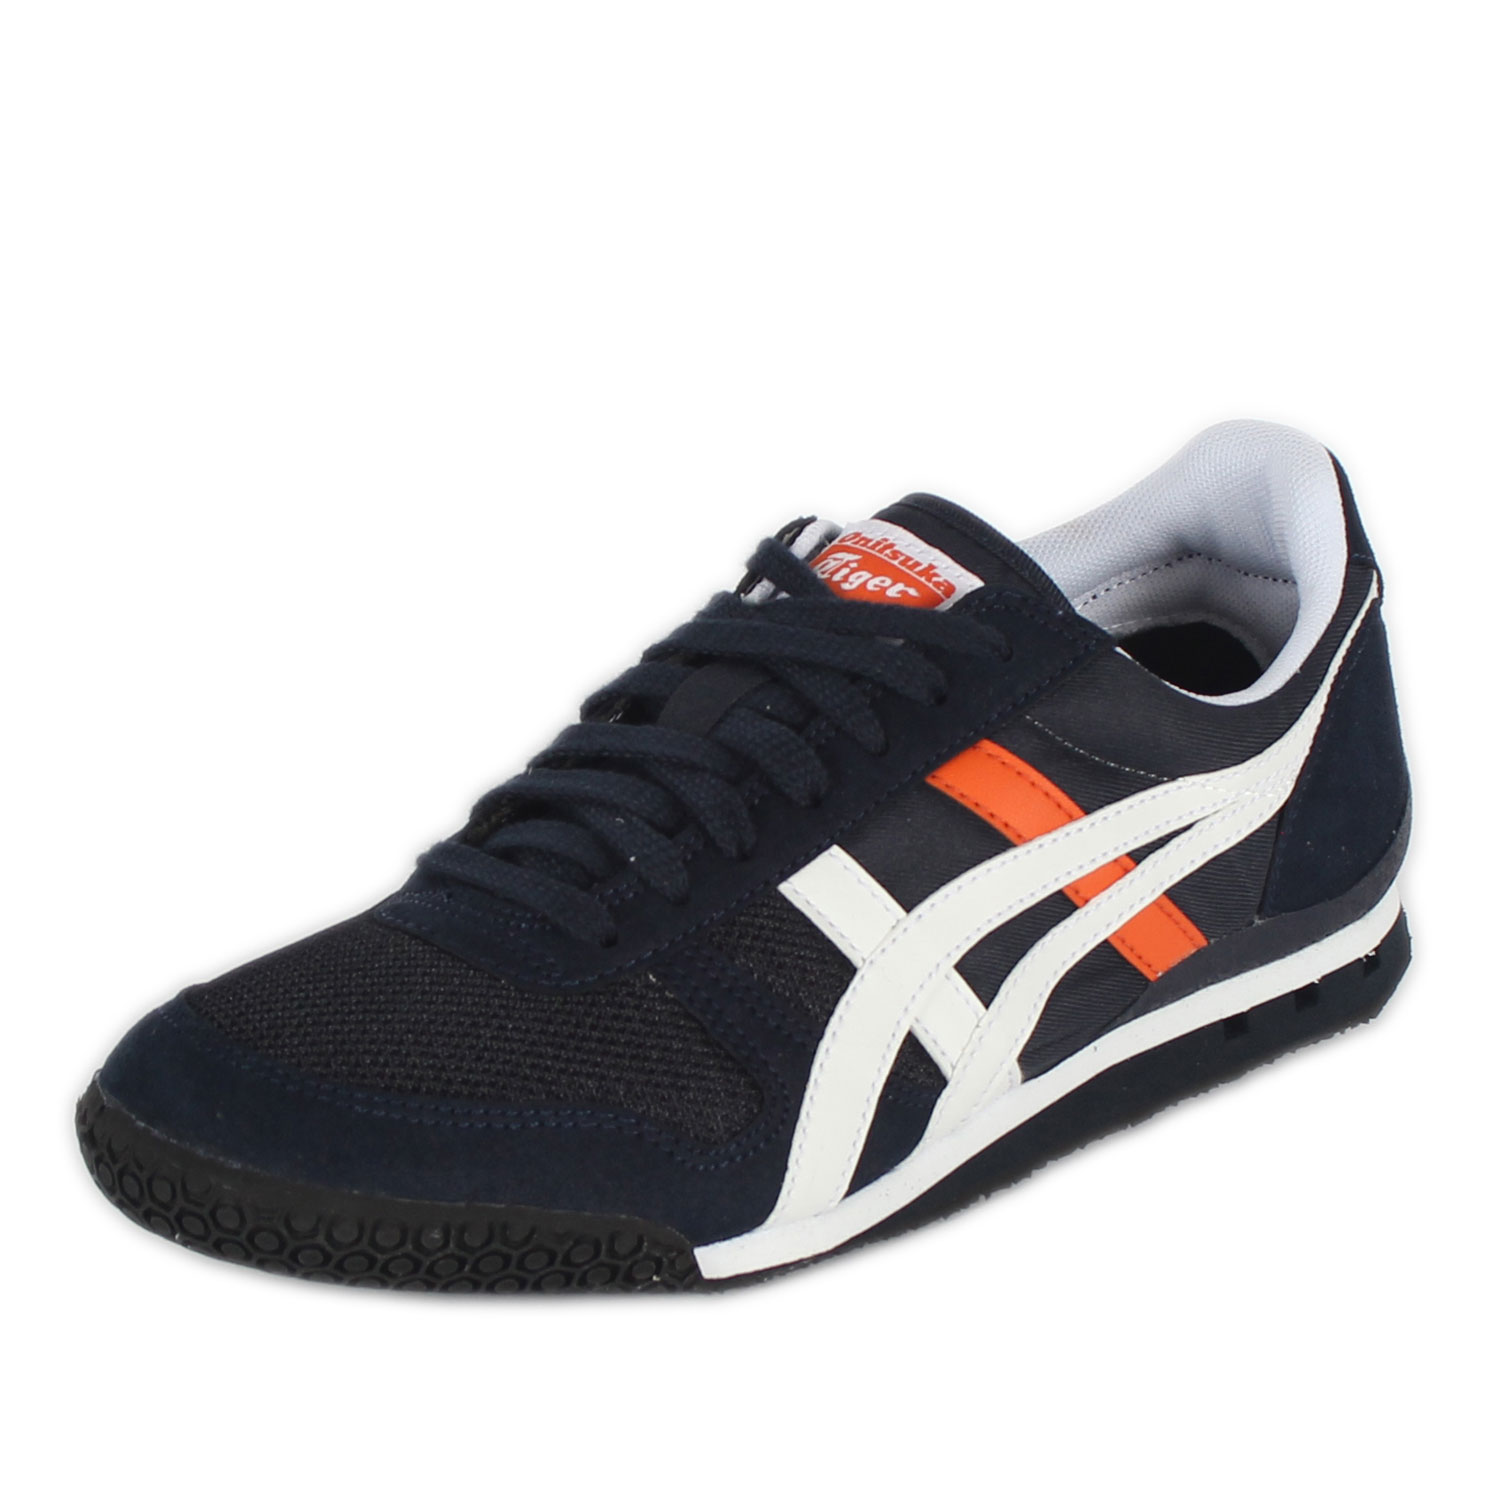 Mens Onitsuka Tiger Ultimate 81 Shoes In Dark Navy/White